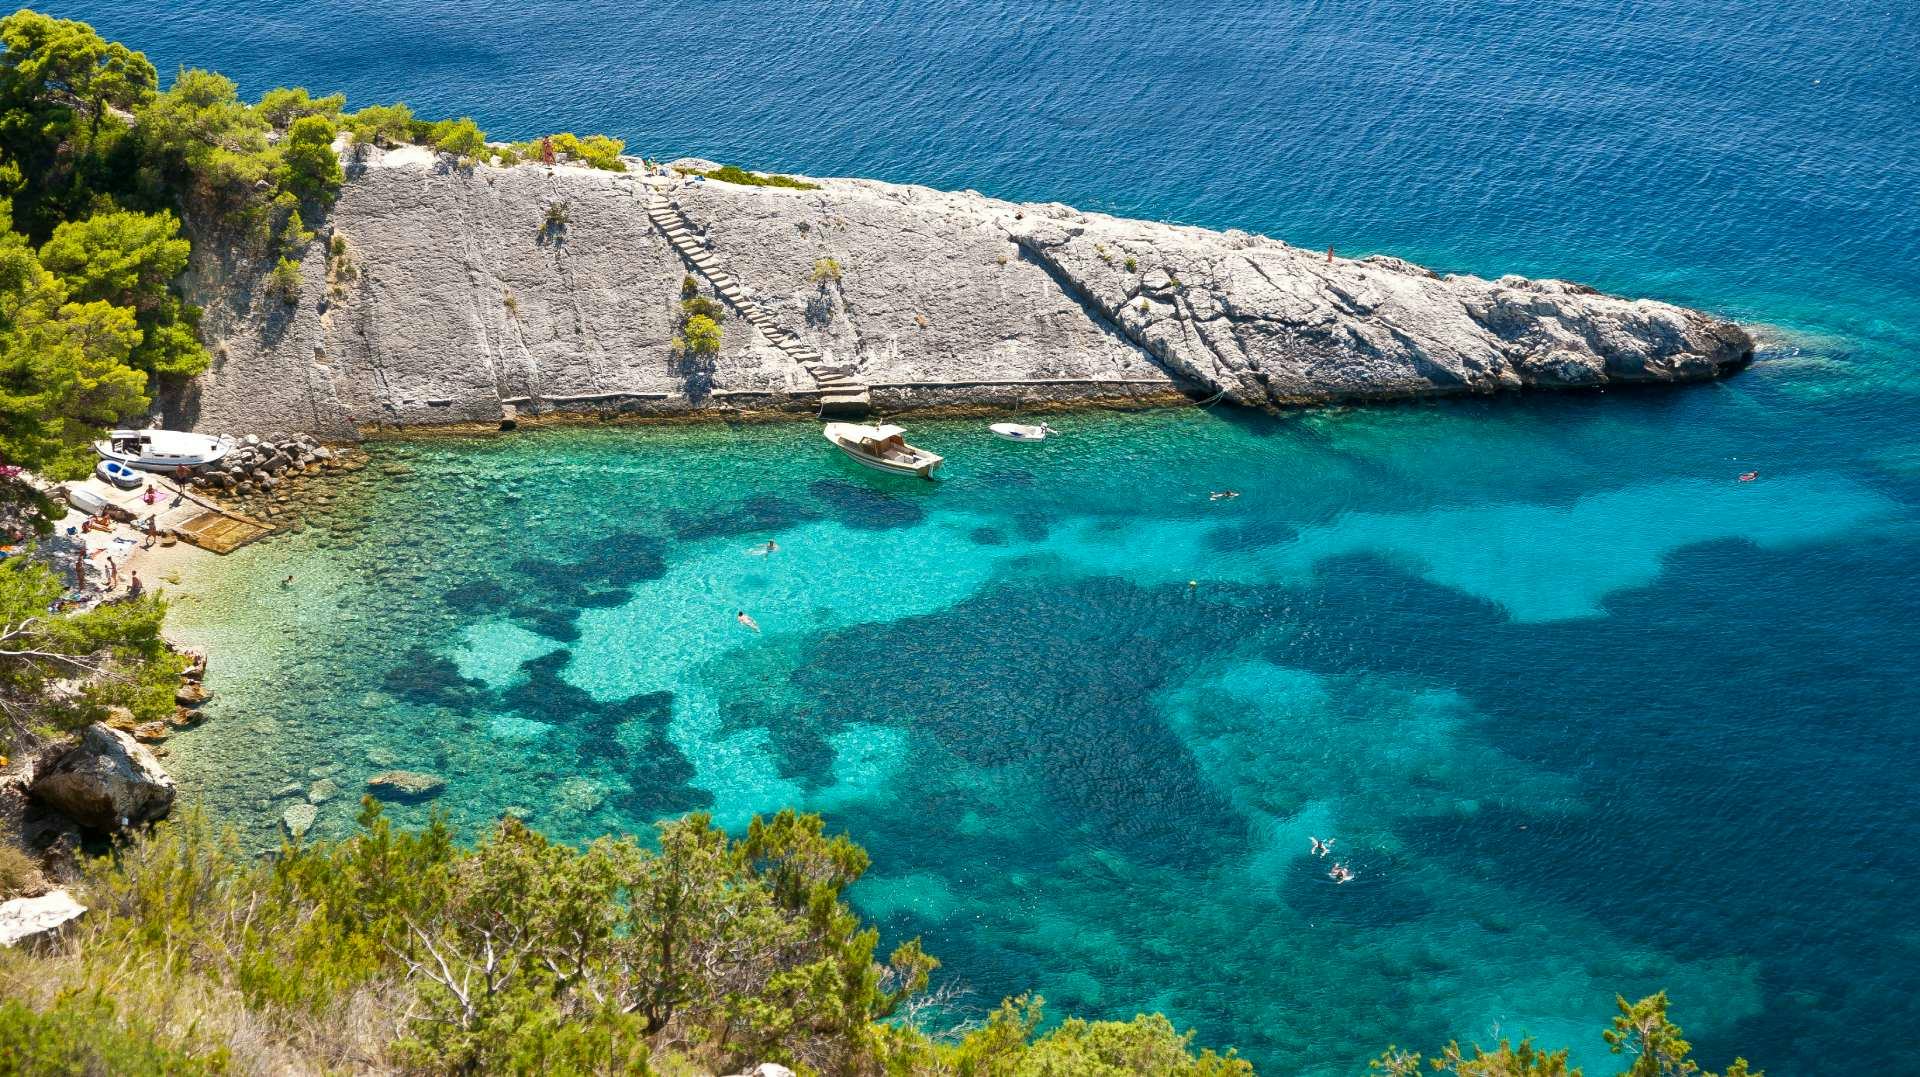 One of the most interesting-looking beaches of Hvar island, with a massive coastal slope protecting the bay from the southern wind. It is an ideal stop for swimming or snorkeling.